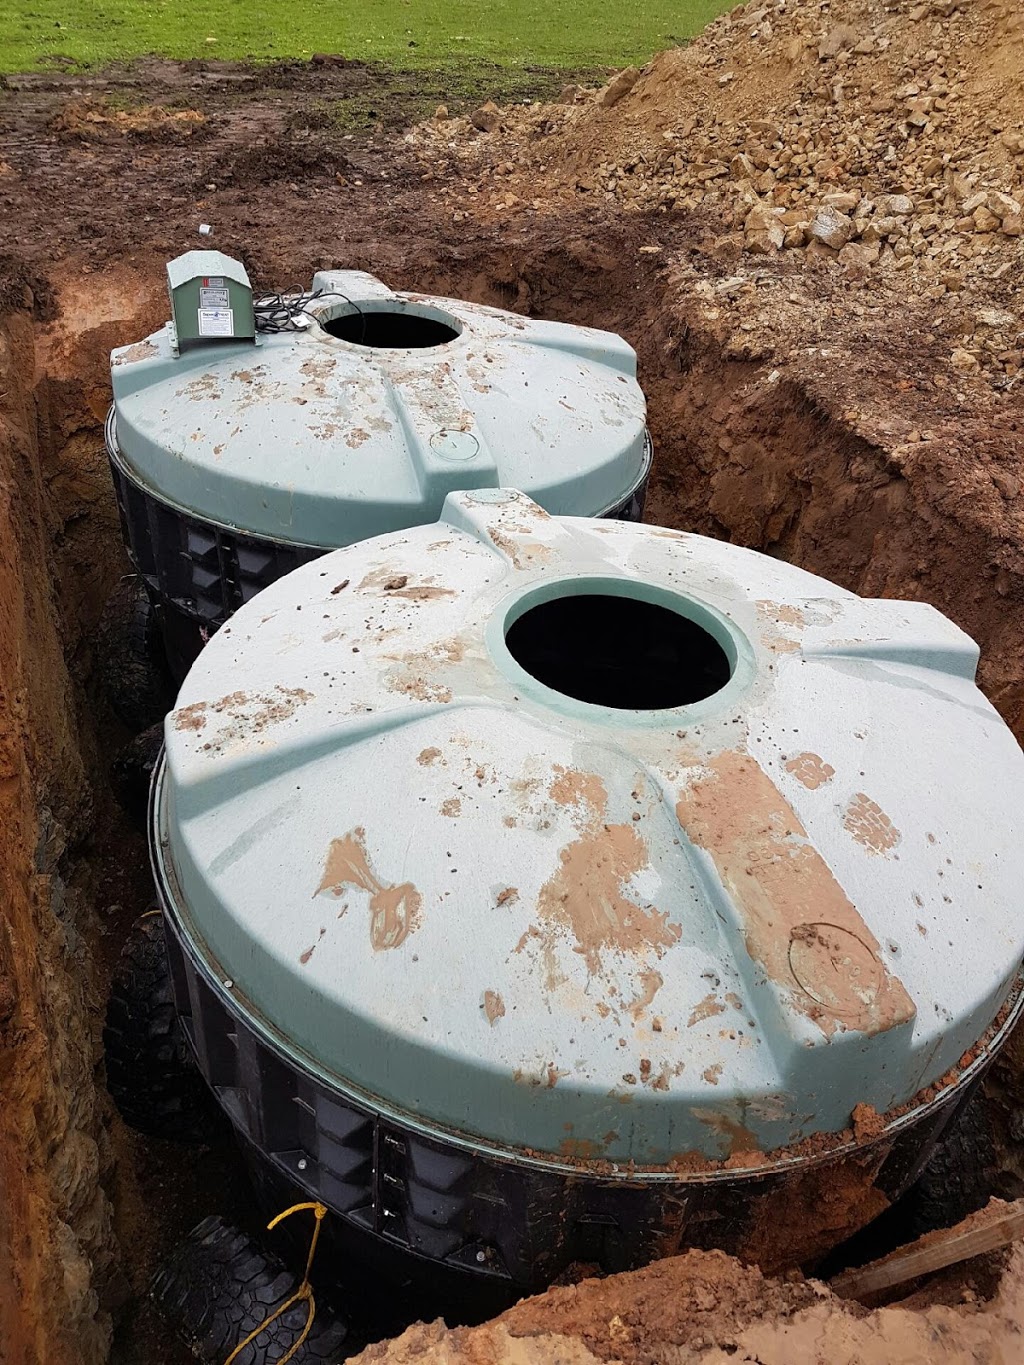 Central Vic Septic Services | plumber | 33 Bakewell St, Bendigo VIC 3550, Australia | 0438428714 OR +61 438 428 714